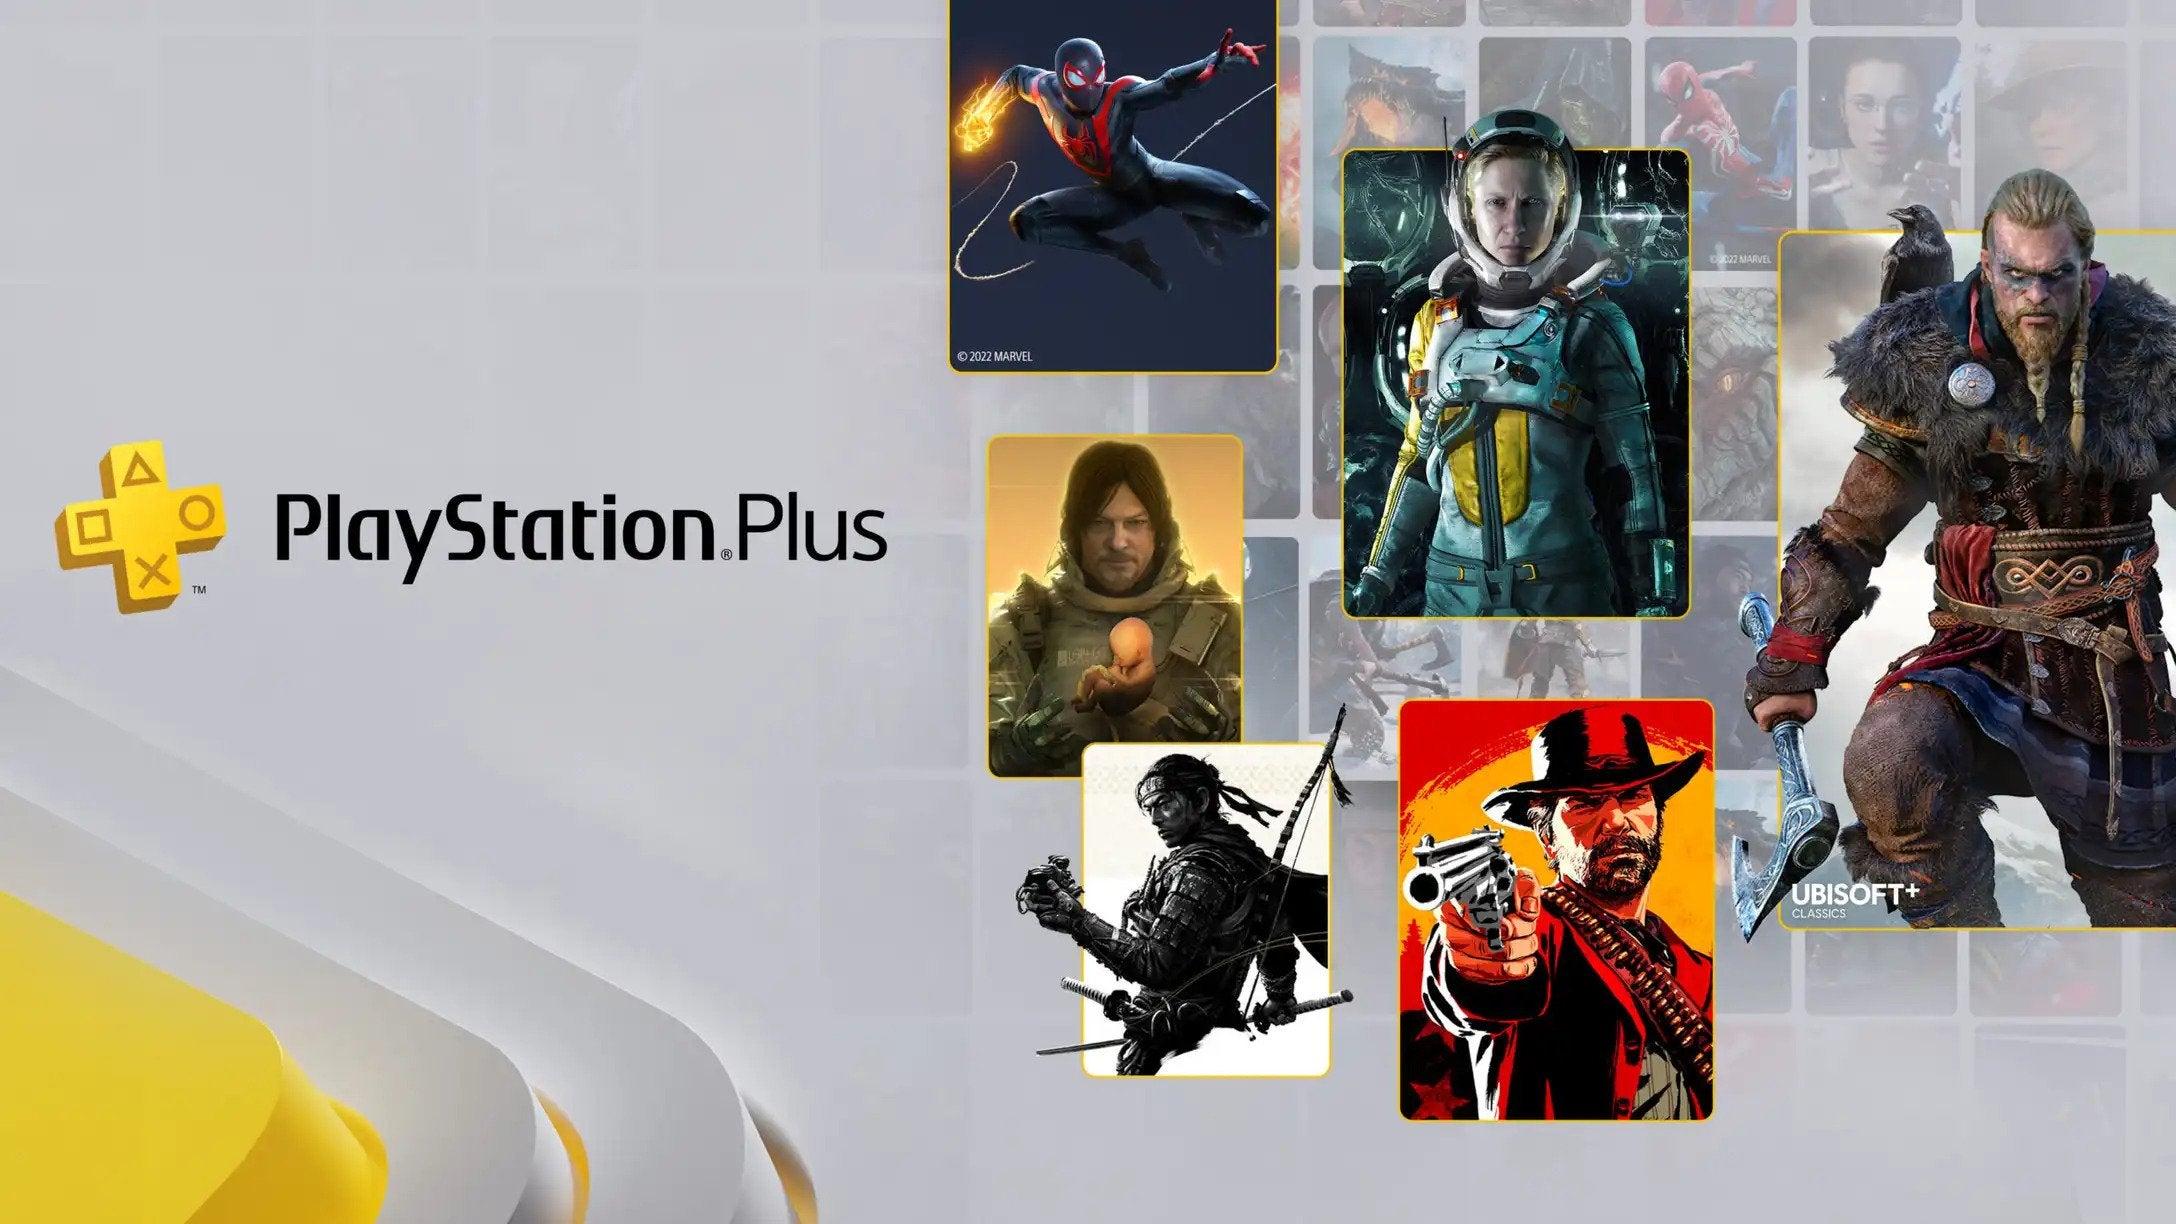 Finally, some actual, genuine PlayStation Plus deals have arrived in the Cyber Monday PS5 sales